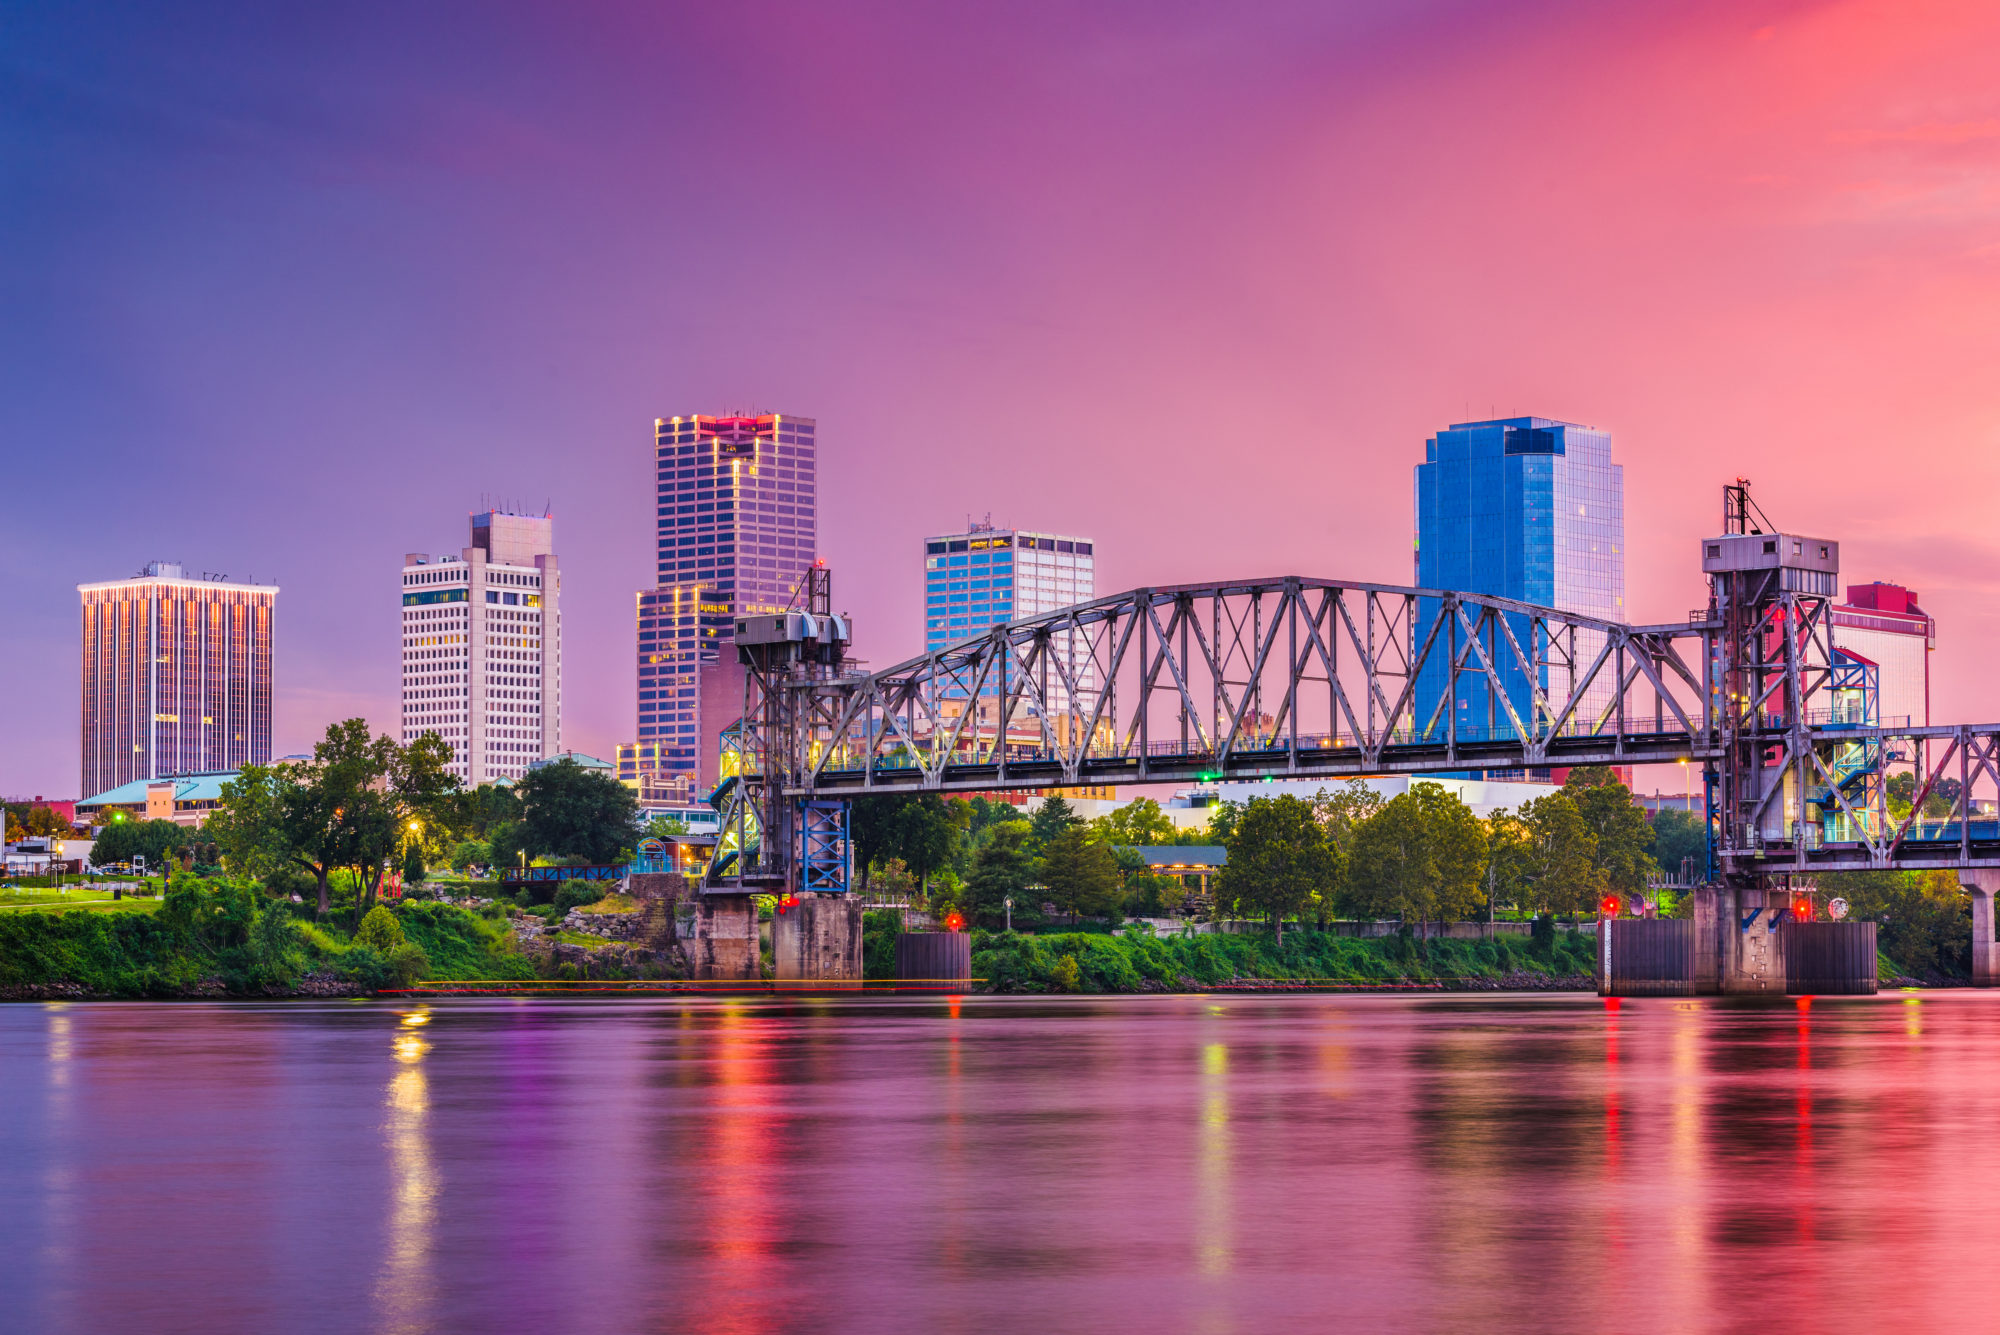 City of Little Rock, AR across the river at sunset